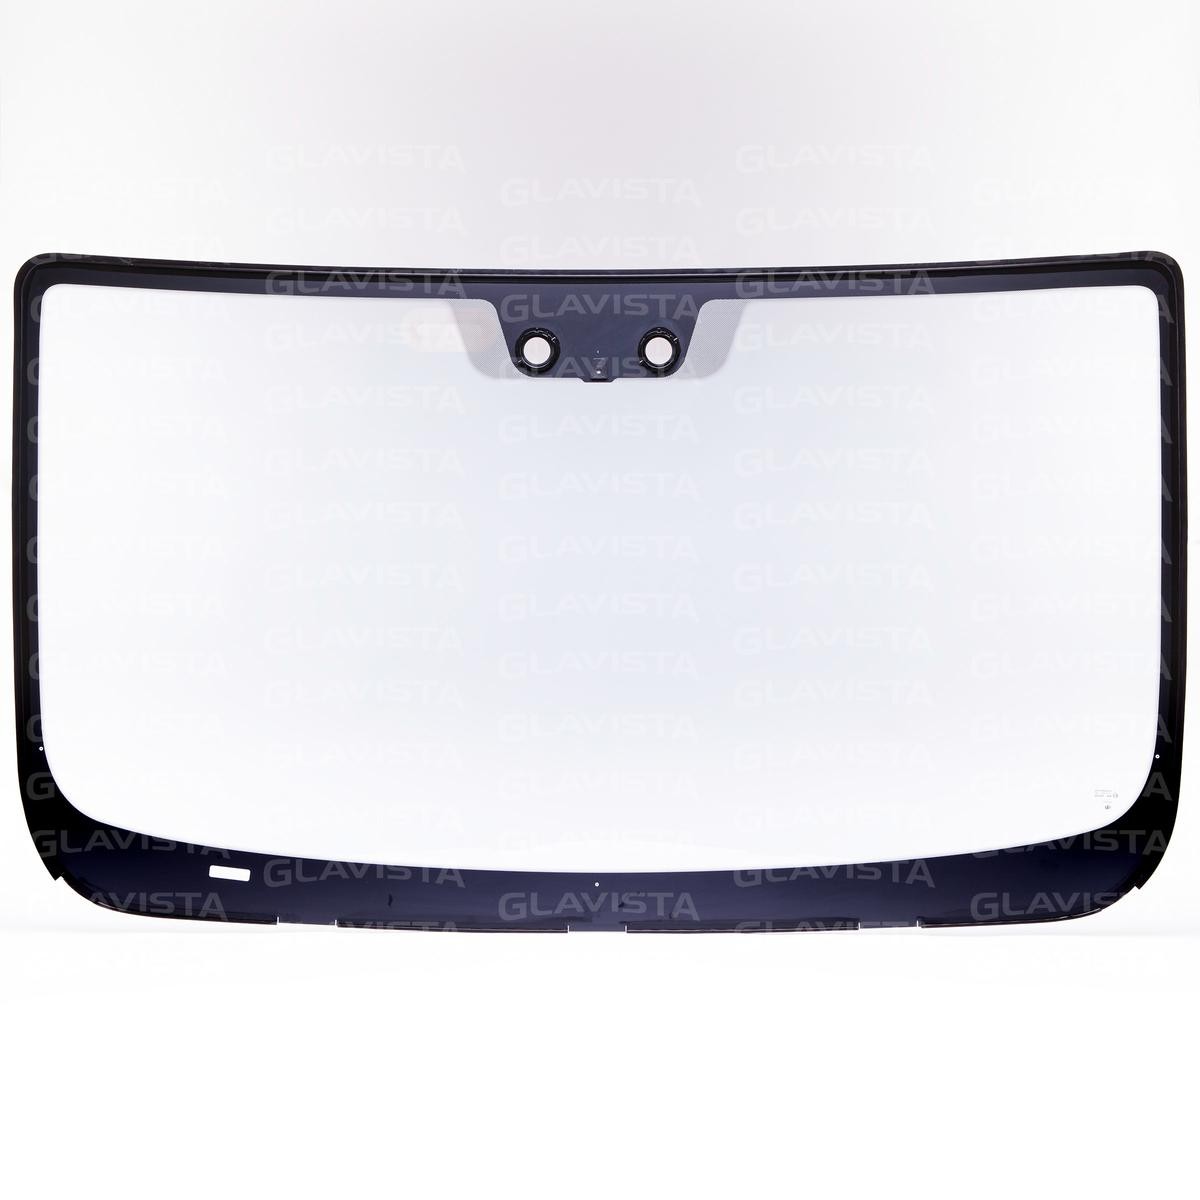 GLAVISTA Coated, with mirror holder, with rain sensor arrangement, with light sensor arrangement, with sight window for vehicle identification number (VIN) Windshield WS/SEN3750VS buy